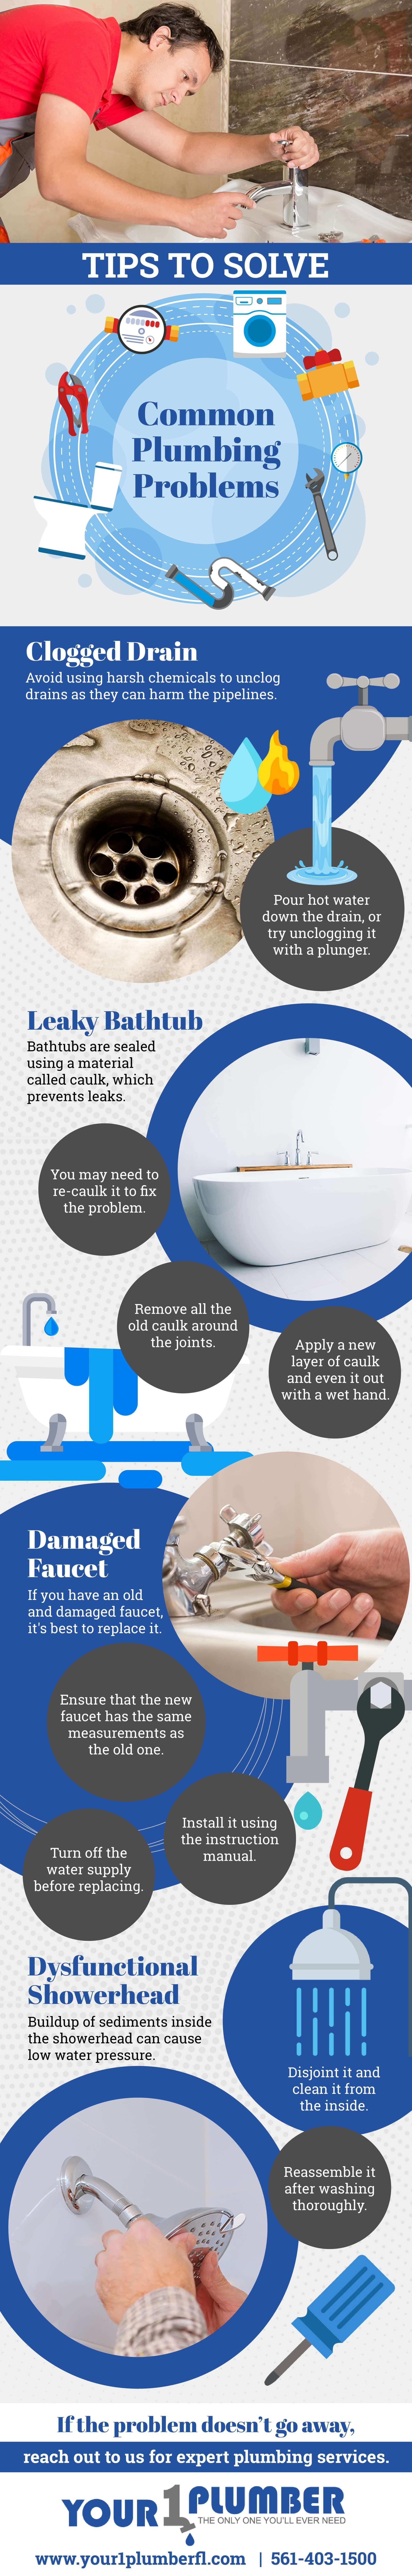 tips-to-solve-common-plumbing-problems-min11-min